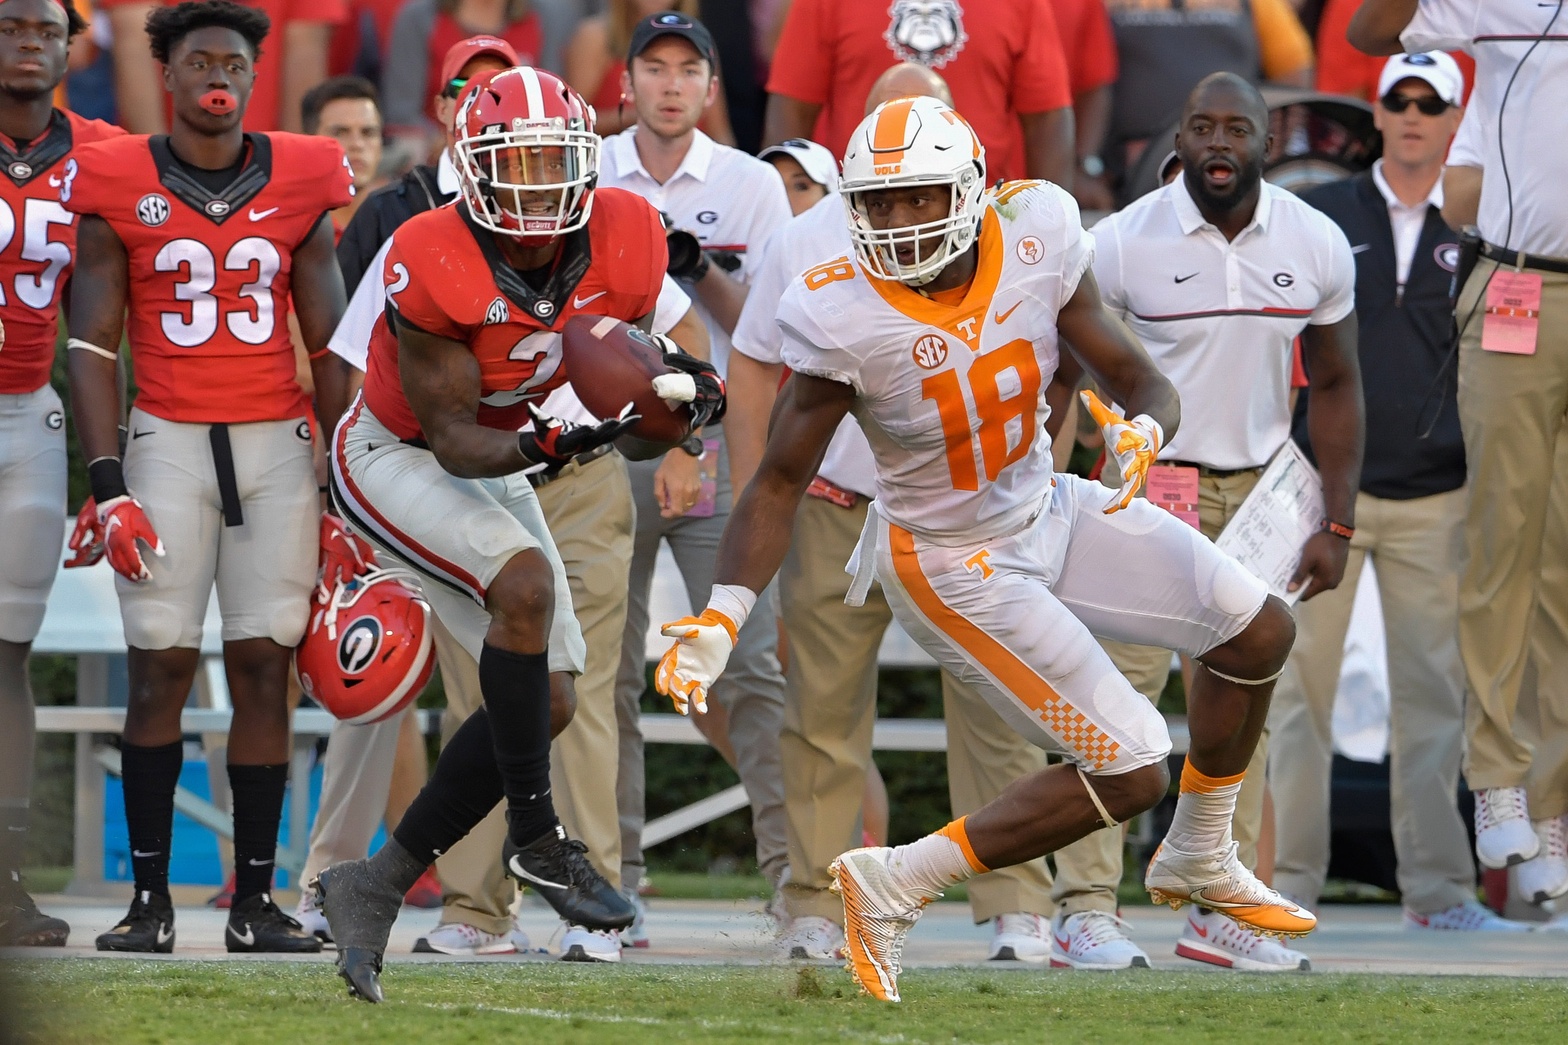 Oct 1, 2016; Athens, GA, USA; Georgia Bulldogs defensive back Maurice Smith (2) intercepts a pass in front of Tennessee Volunteers tight end Jason Croom (18) during the fourth quarter at Sanford Stadium. Tennessee defeated Georgia 34-31. Mandatory Credit: Dale Zanine-USA TODAY Sports